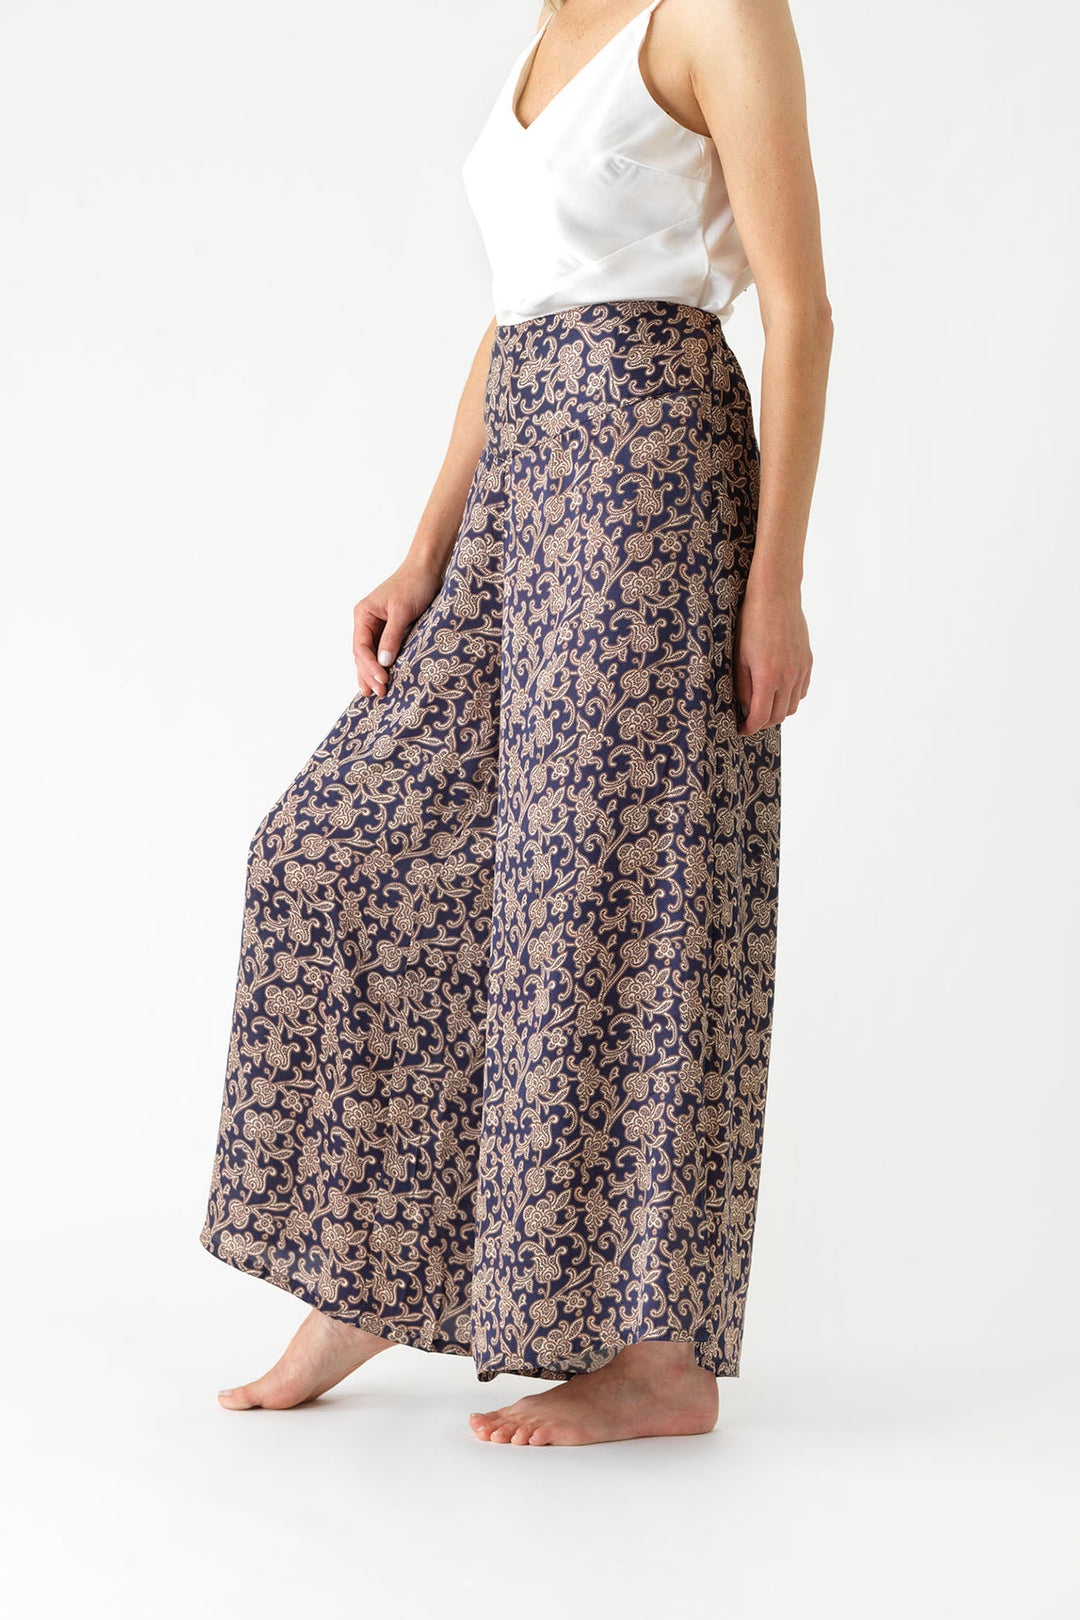 ladies satin palazzo pants in blue paisley print by One Hundred Stars